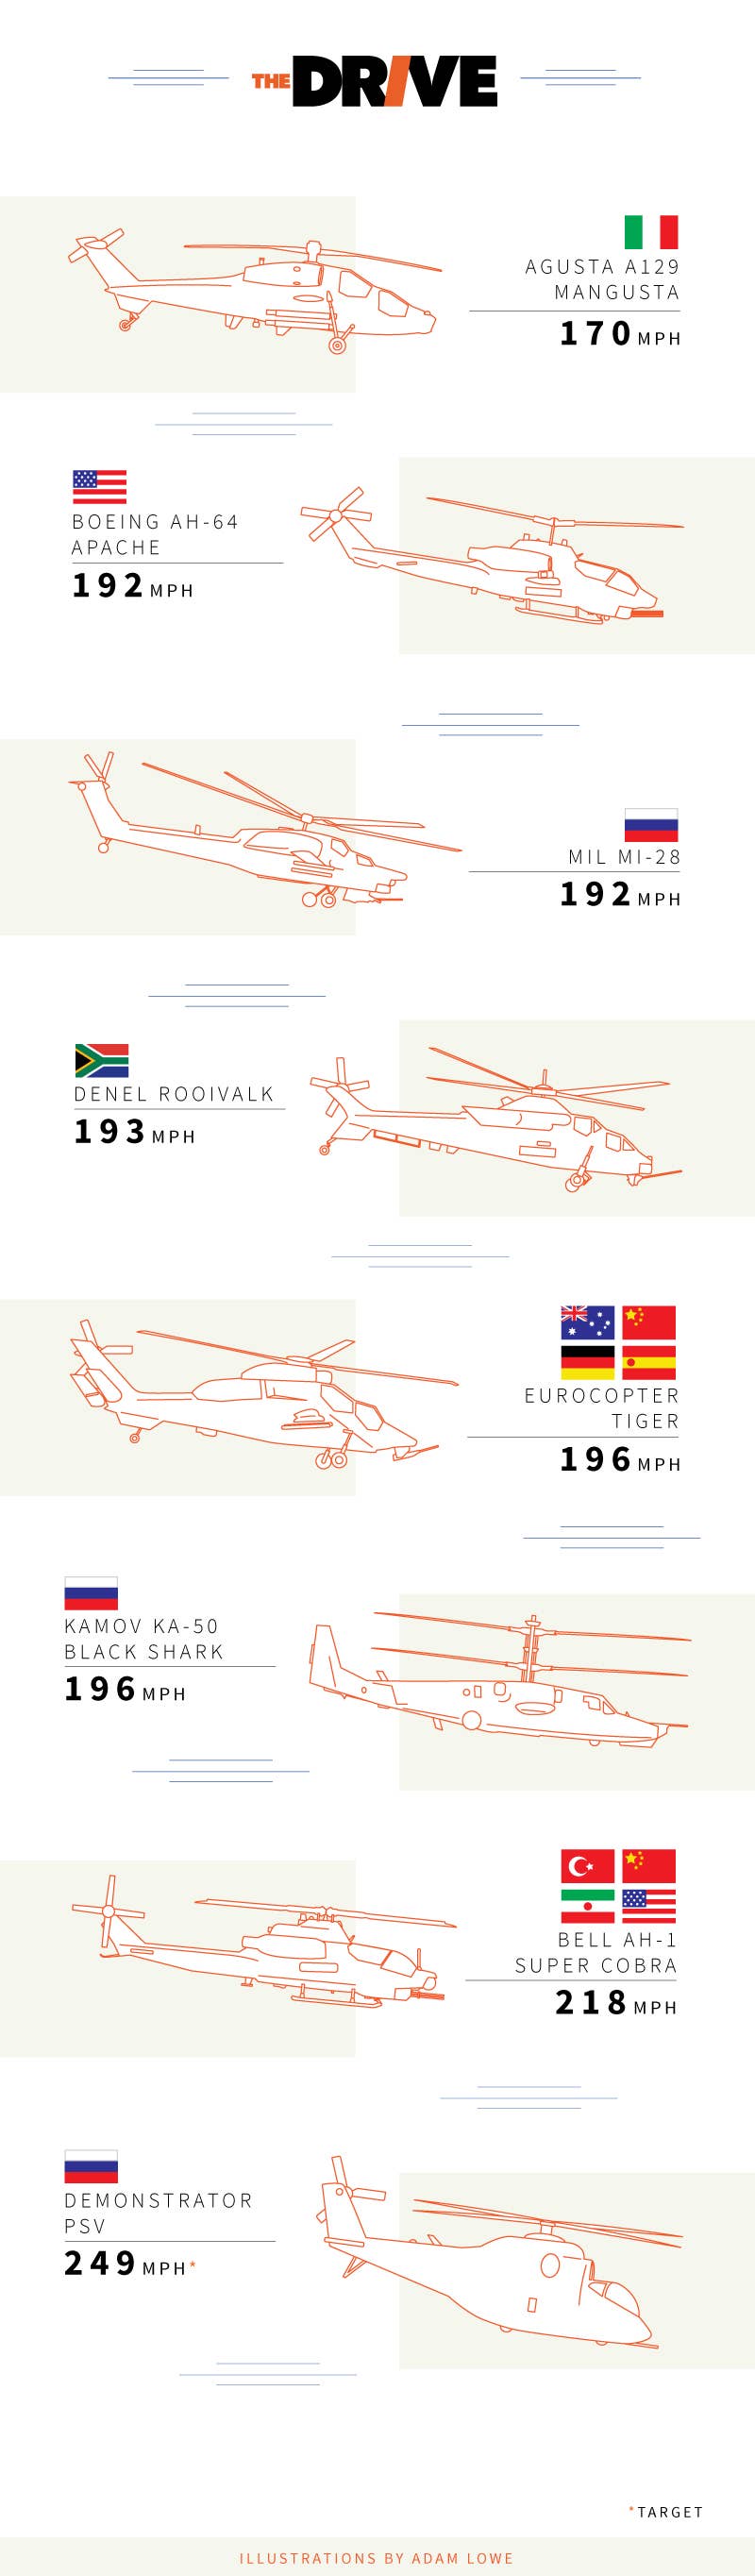 fasthelicopters_infographic_v4.jpg